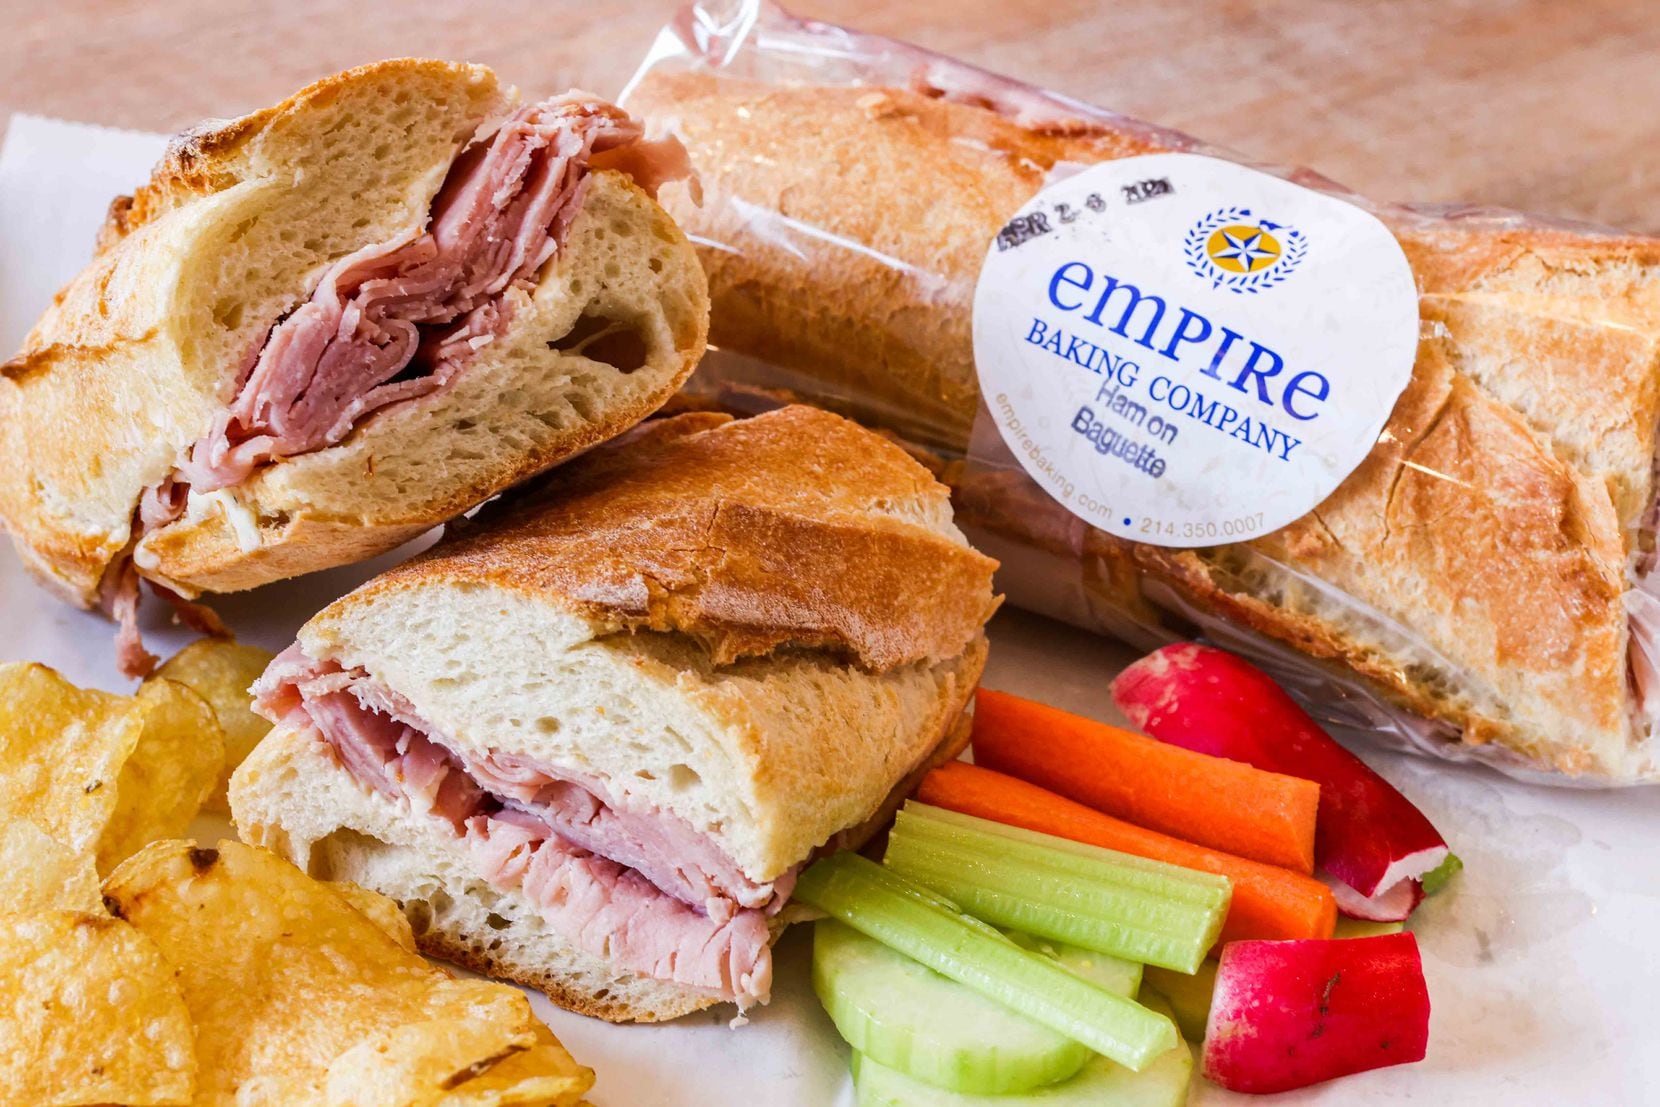 Ham on baguette is one of the most popular sandwiches at Empire Baking Company.